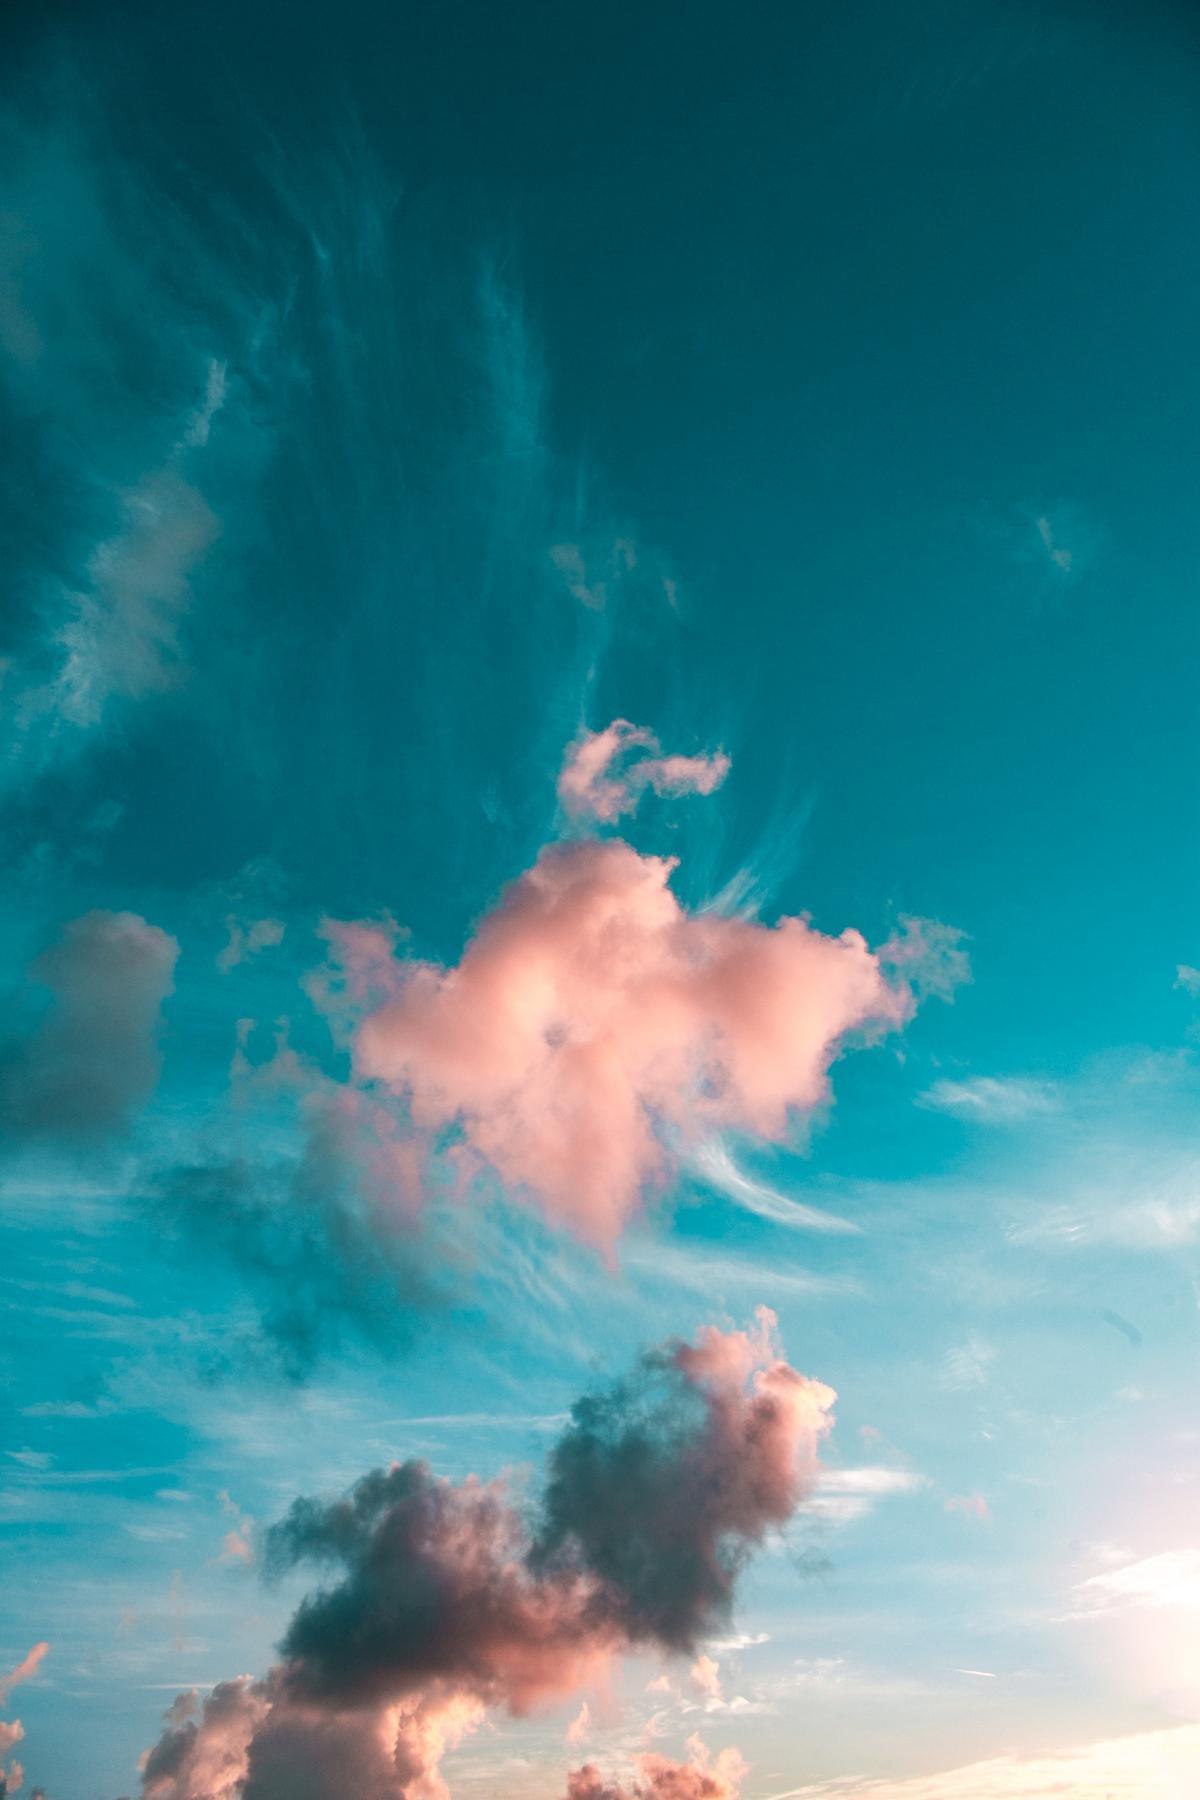 wallpaper for smartphone free download,sky,cloud,blue,daytime,atmosphere